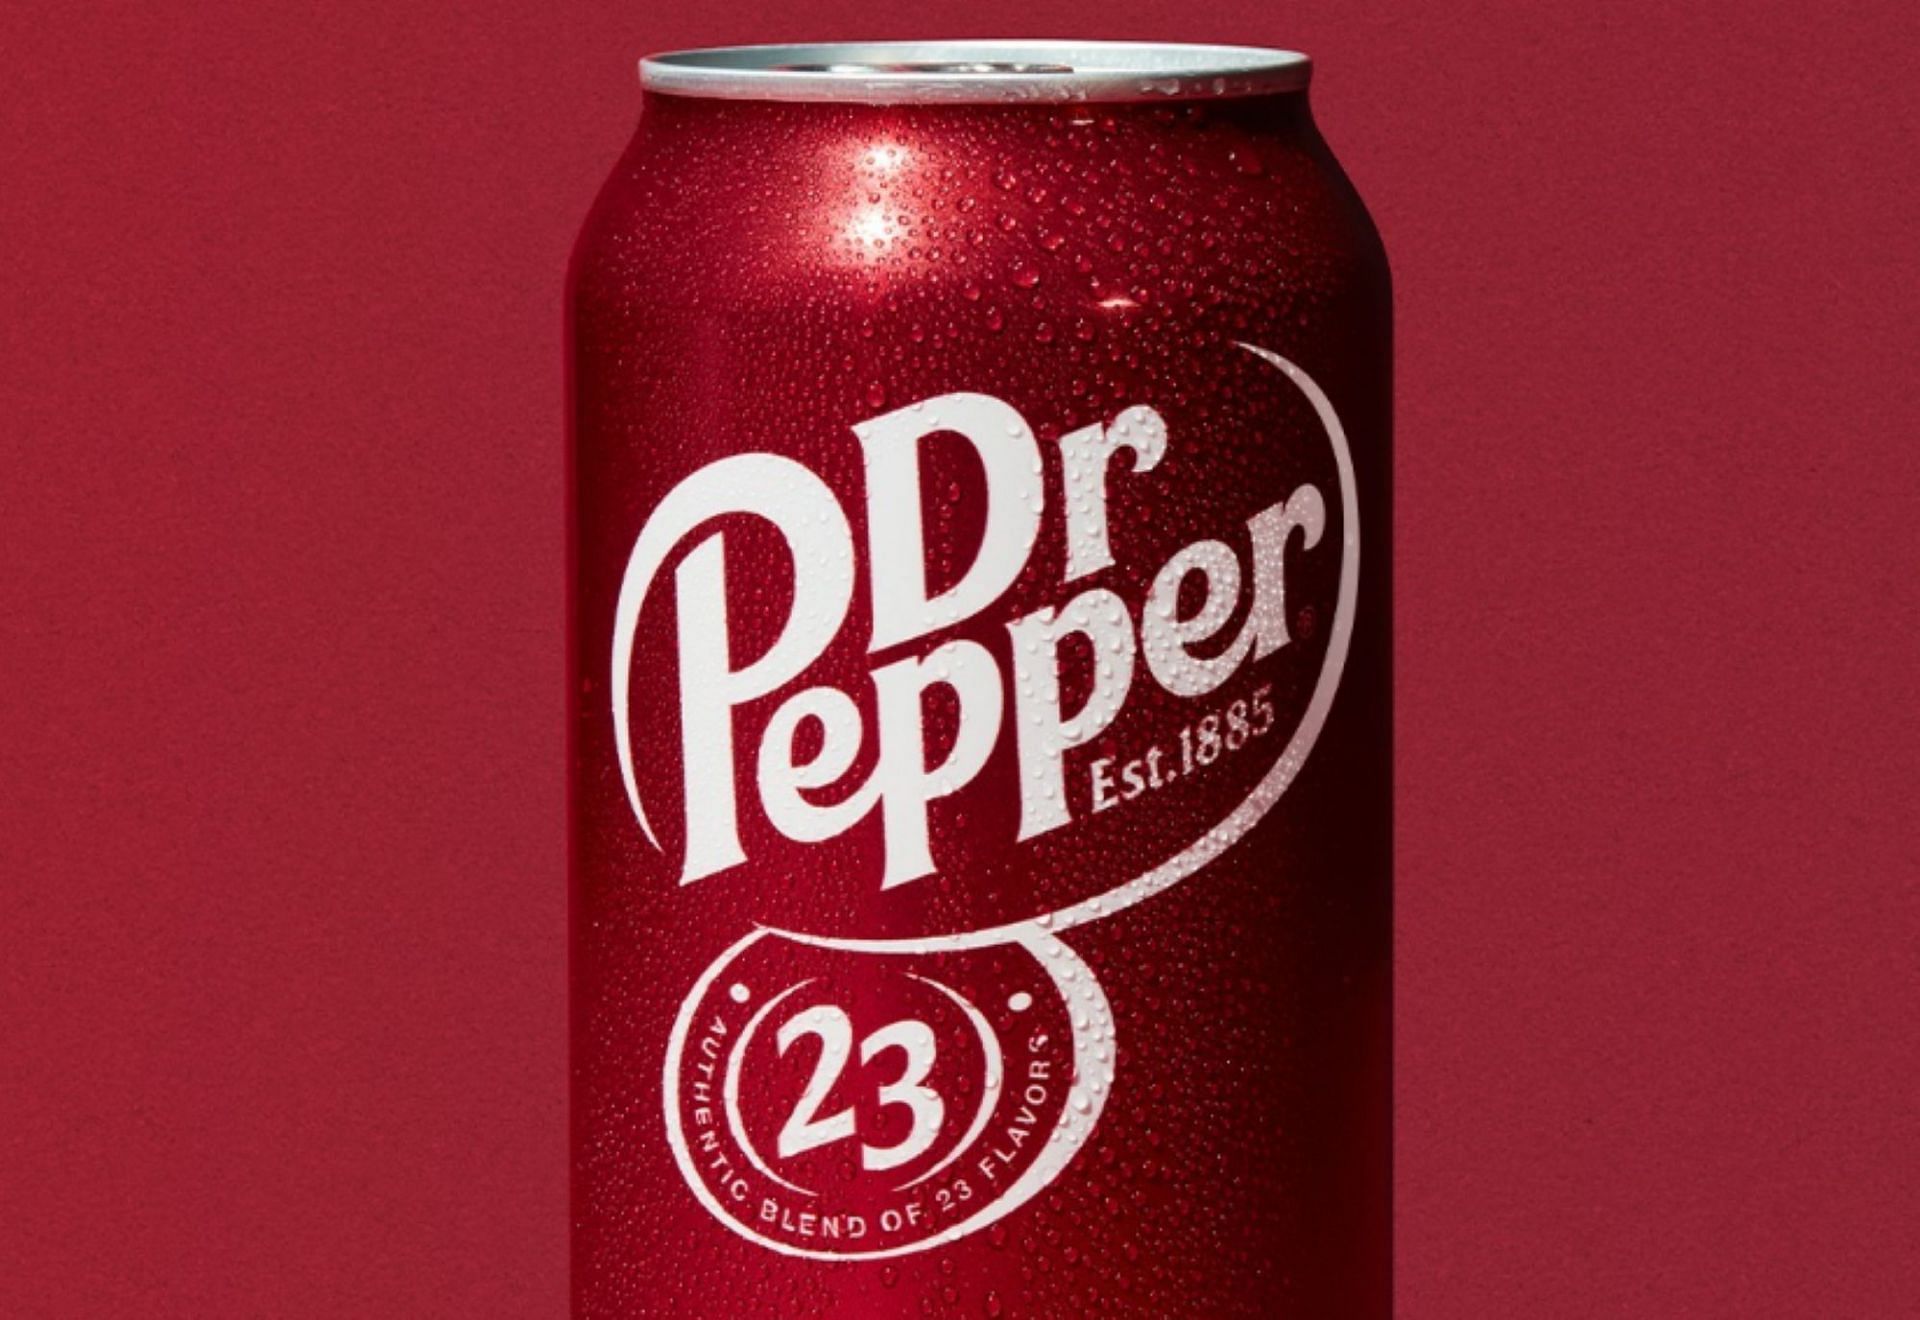 Claims of Dr Pepper being discontinued spread across TikTok (Image via drpepper/Instagram)